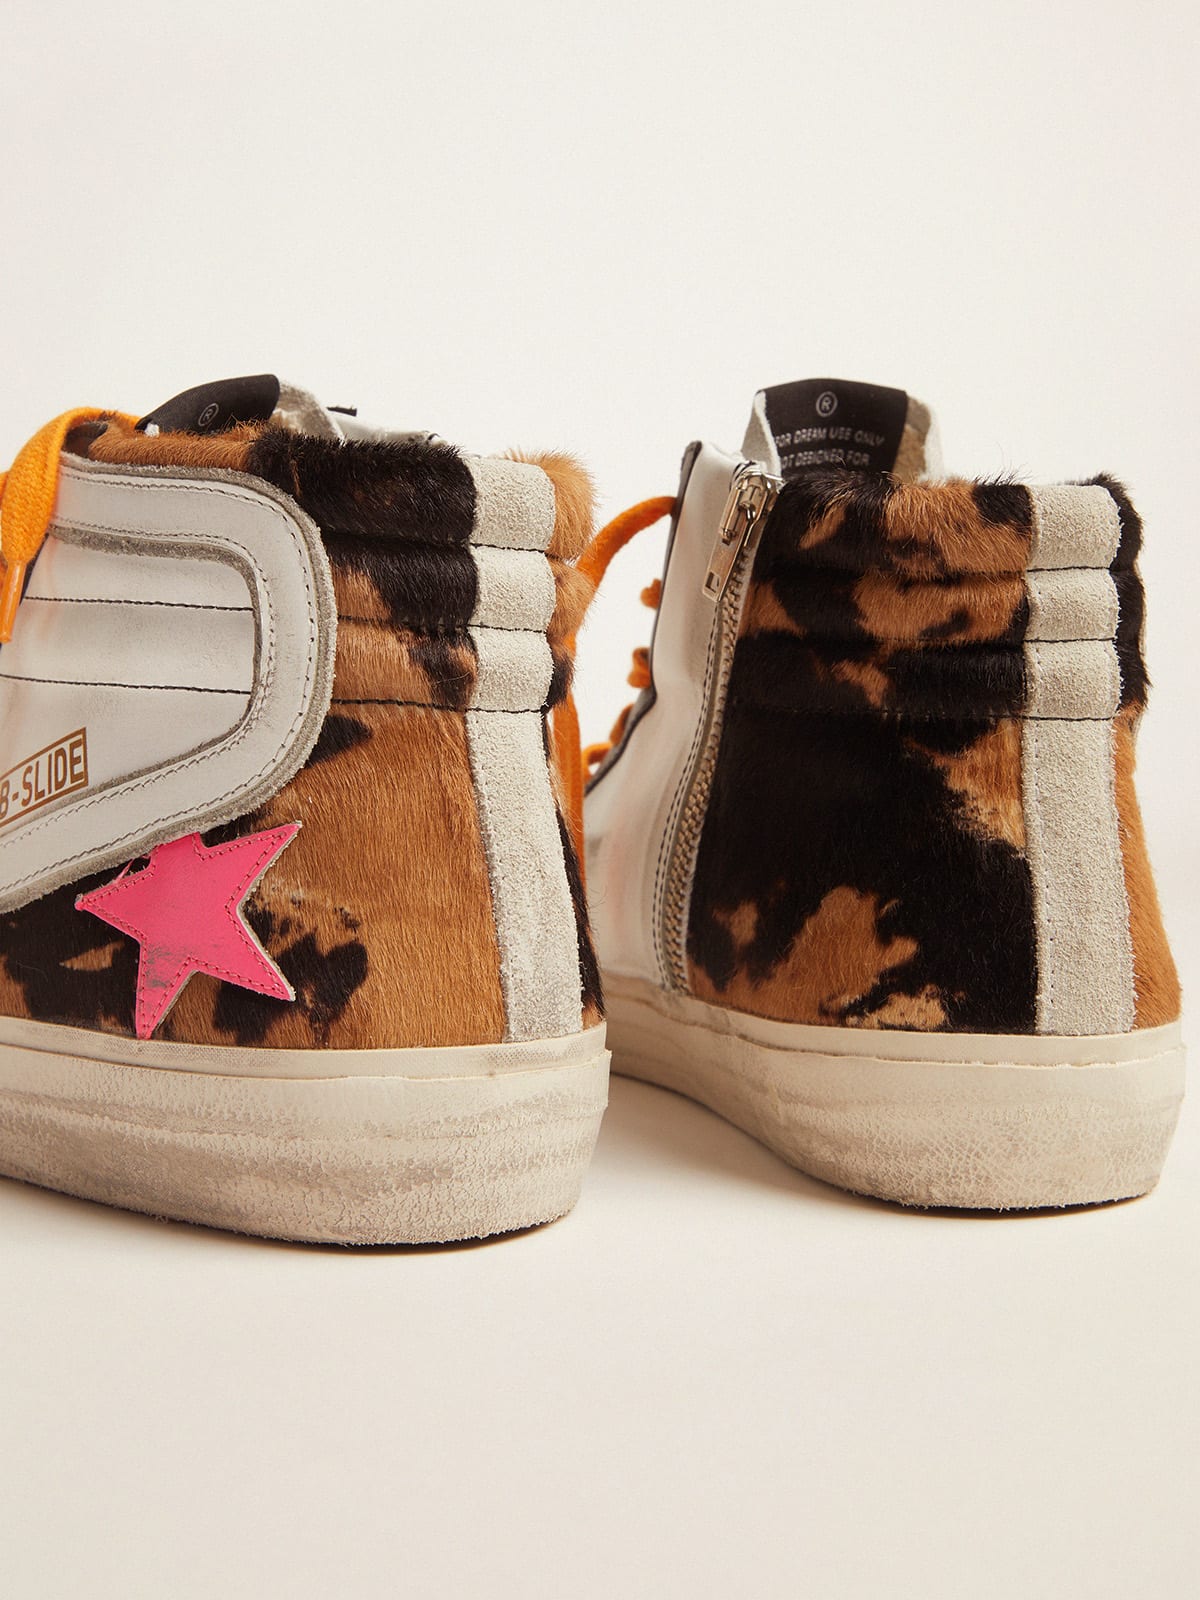 Golden Goose - Slide sneakers in pony skin with orange laces and a fuchsia star in 